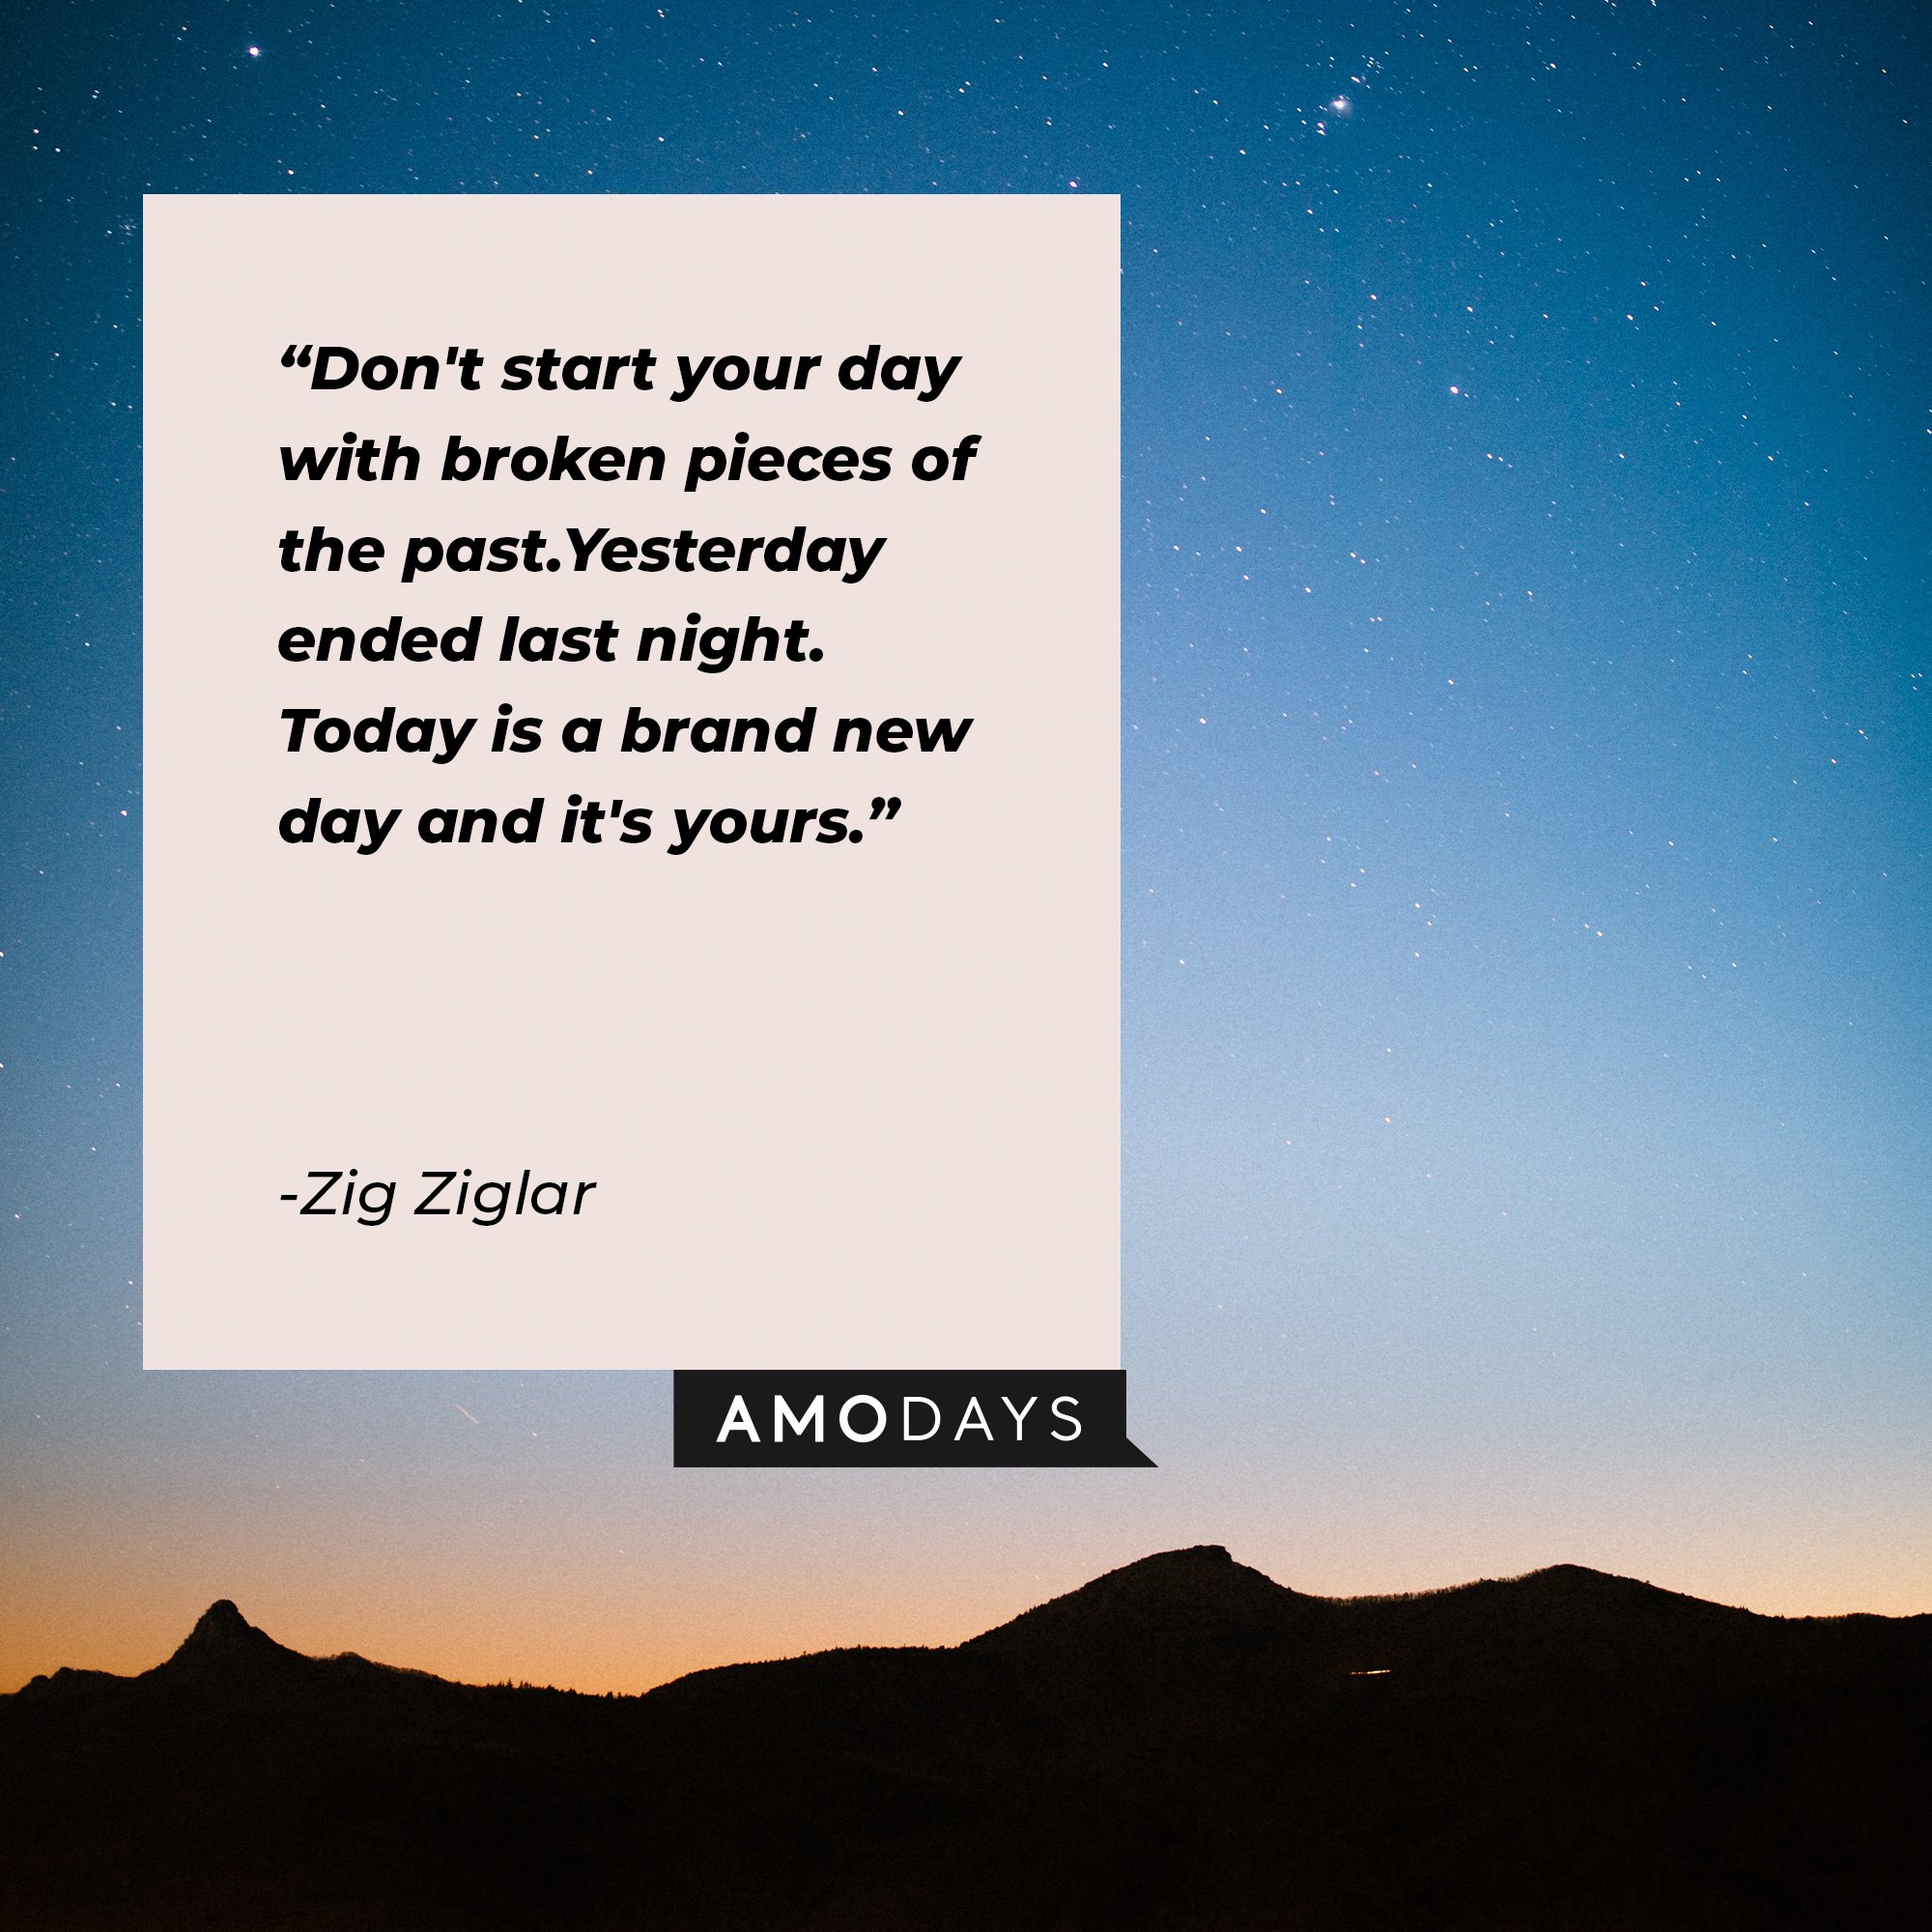 Zig Ziglar’s quote: "Don't start your day with broken pieces of the past. Yesterday ended last night. Today is a brand new day and it's yours." | Image: AmoDays   